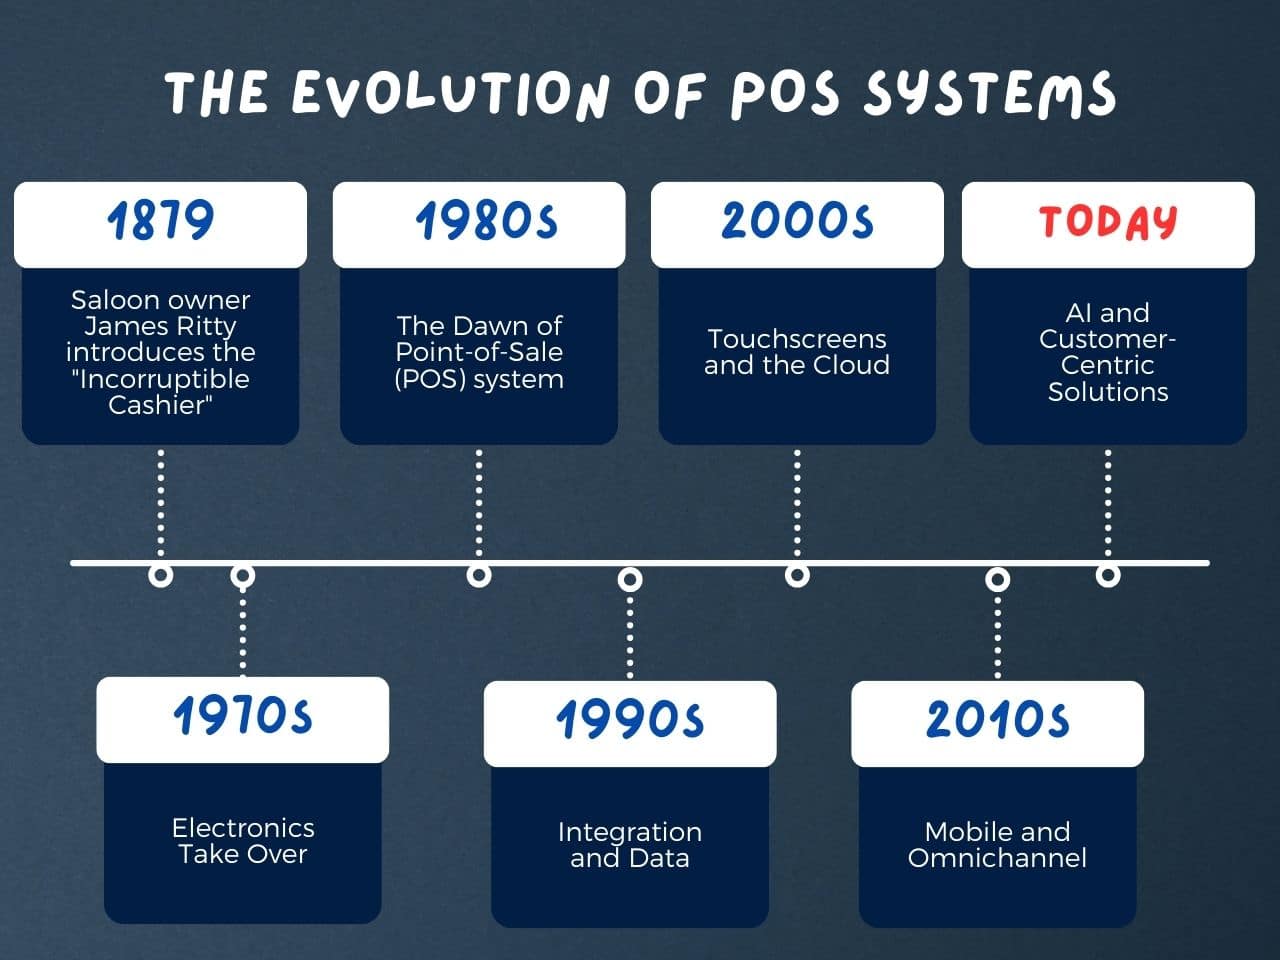 Timeline of Evolution of POS systems, from 1879's mechanical cash register to today's AI-powered, cloud-based solutions. Design by NRS.